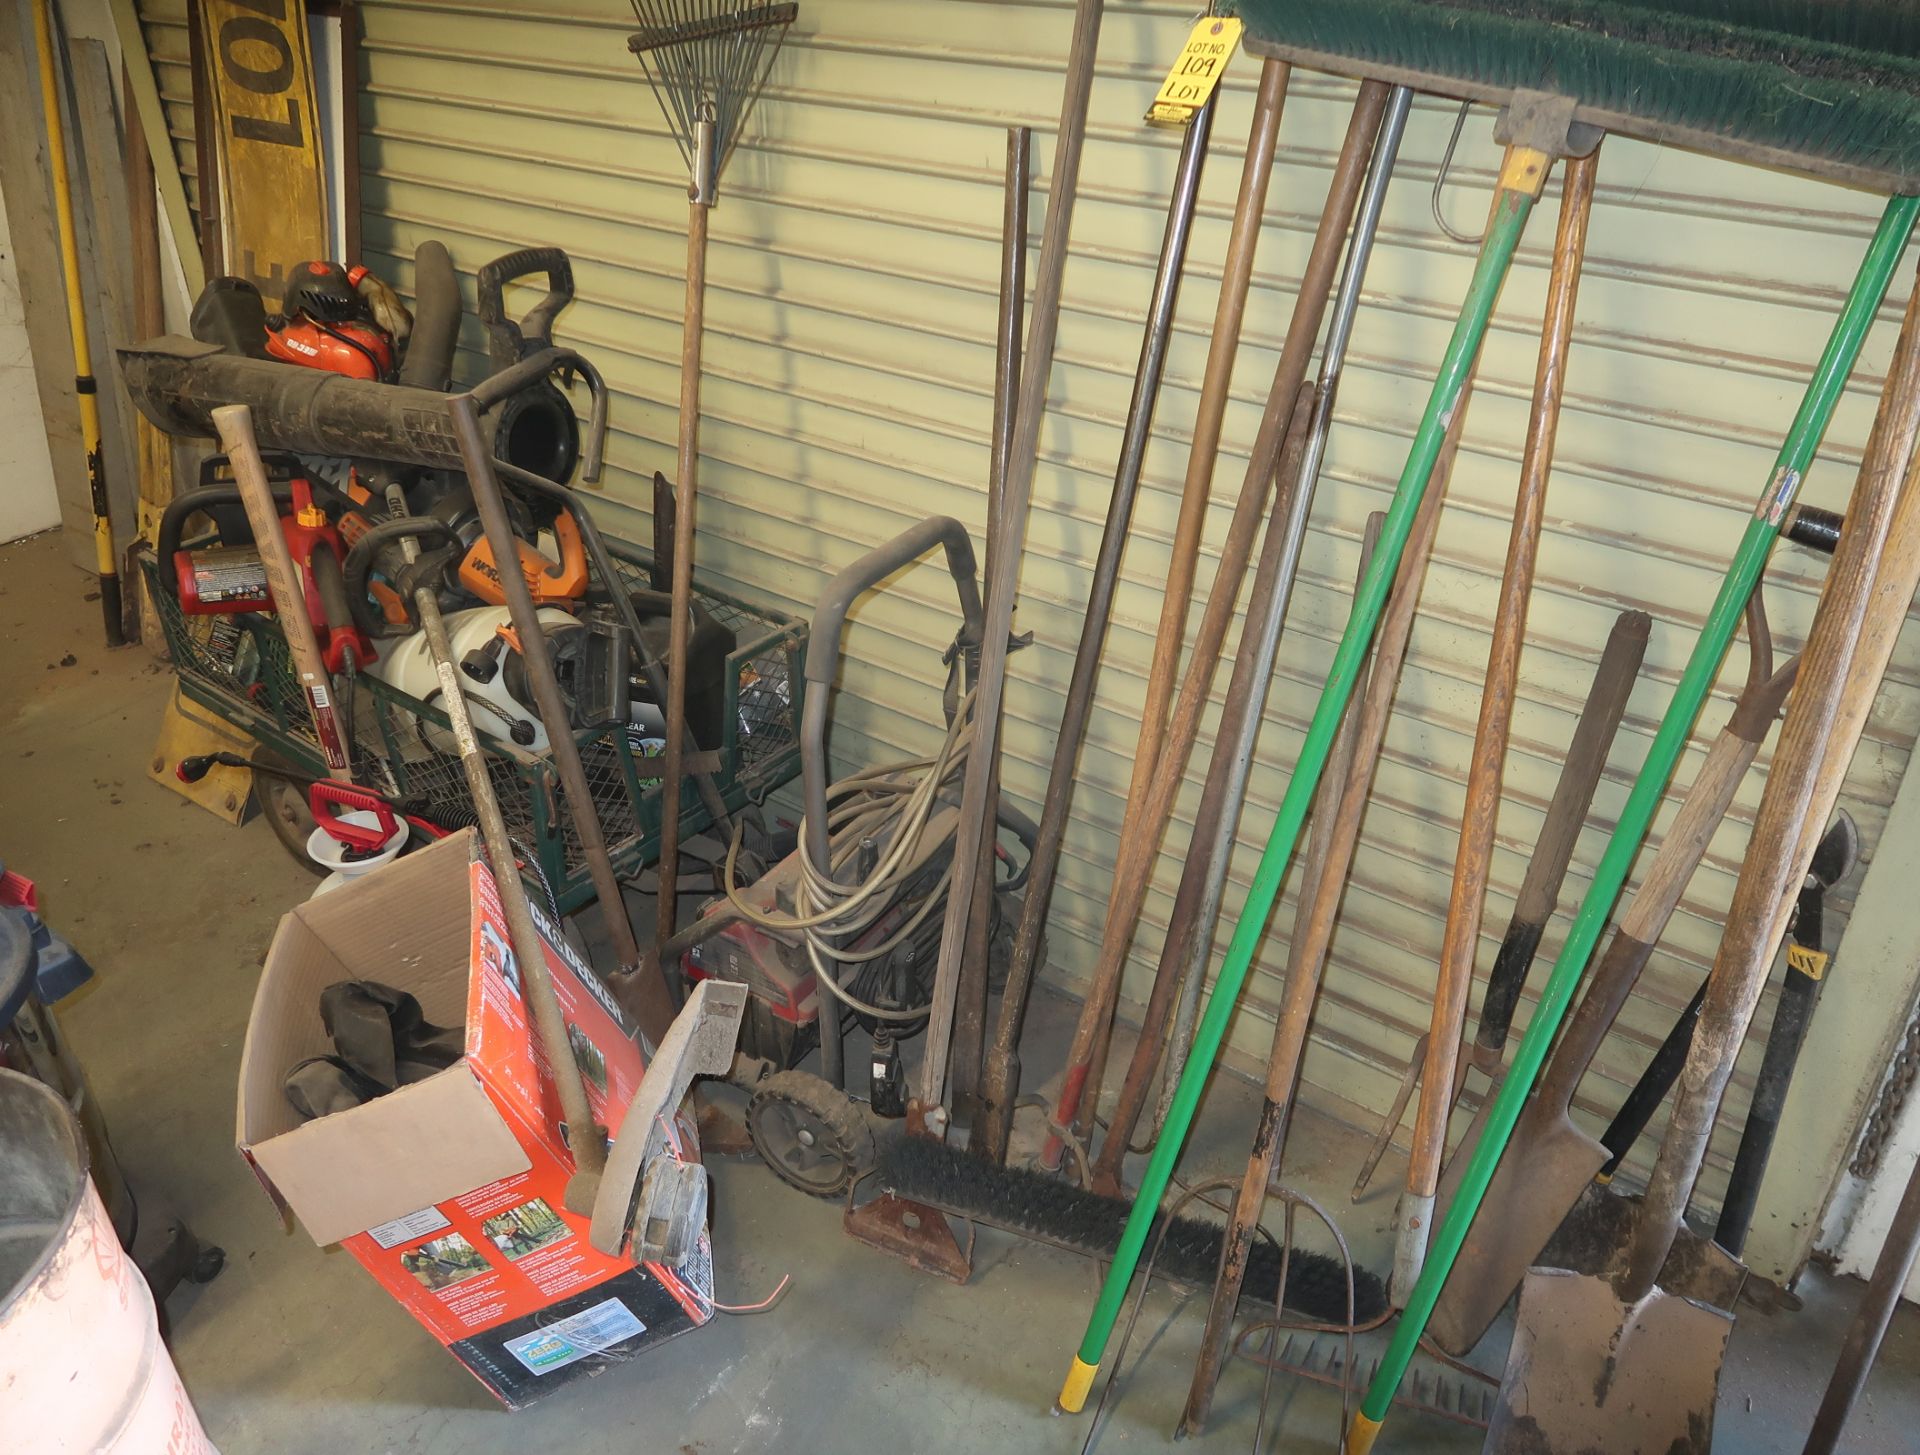 LOT ASST. LAND SCAPING TOOLS, WEED EATER, CHAIN SAW, BLOWER, PRESSURE WASHER, WAGON, ETC.